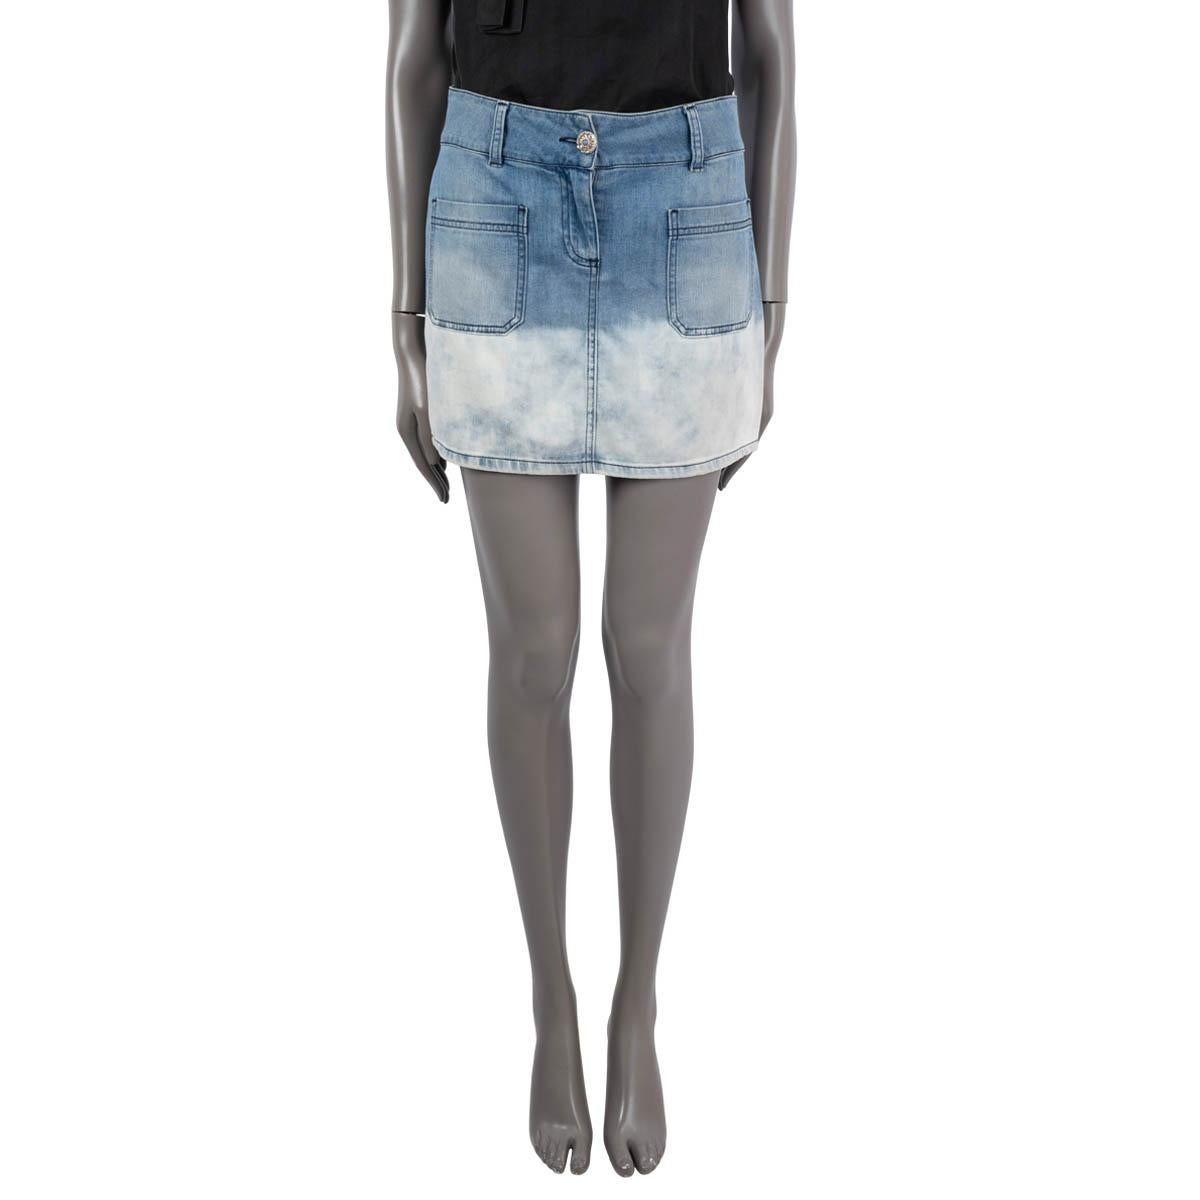 100% authentic Chanel mini denim skirt in blue cotton (60%), viscose (38%) and elastane (2%). Features a white acid washed lower half and two patch pockets on the front. Opens with a jewelled button. Unlined. Has been worn and is in excellent